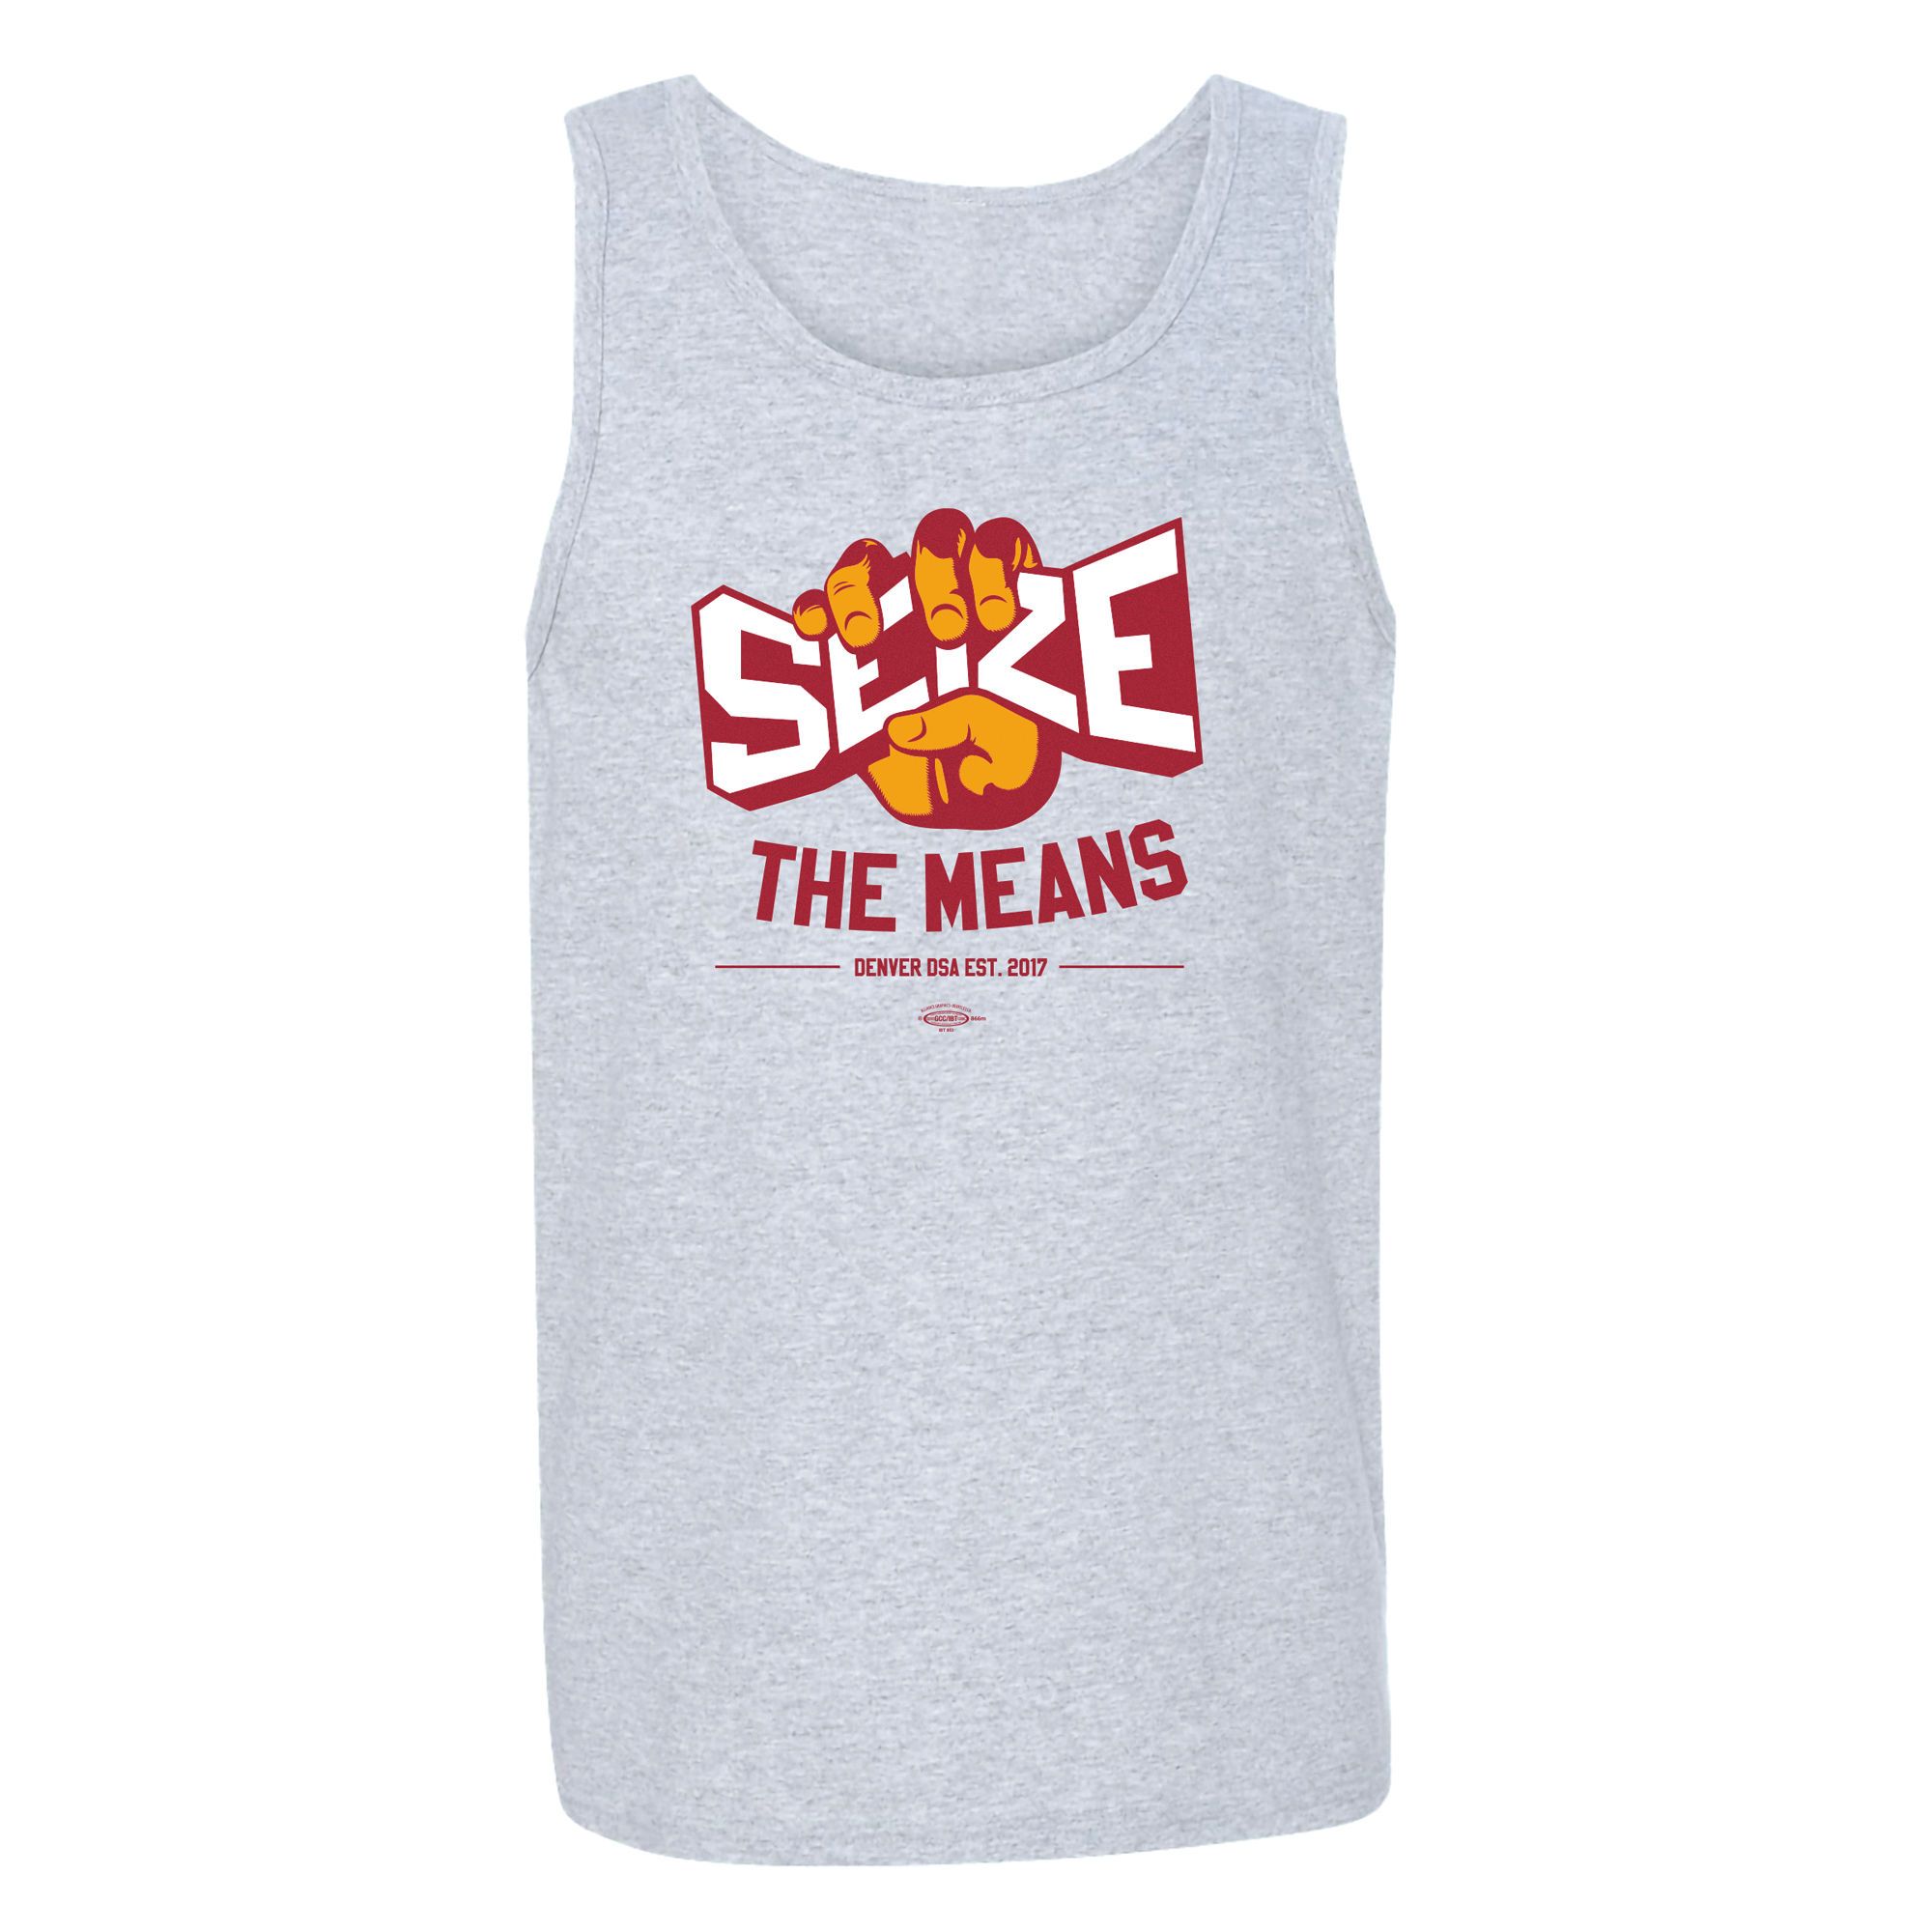 Made in the USA ash gray colored tank-top with colored graphic that says ‘Seize the Means Denver DSA est 2017’